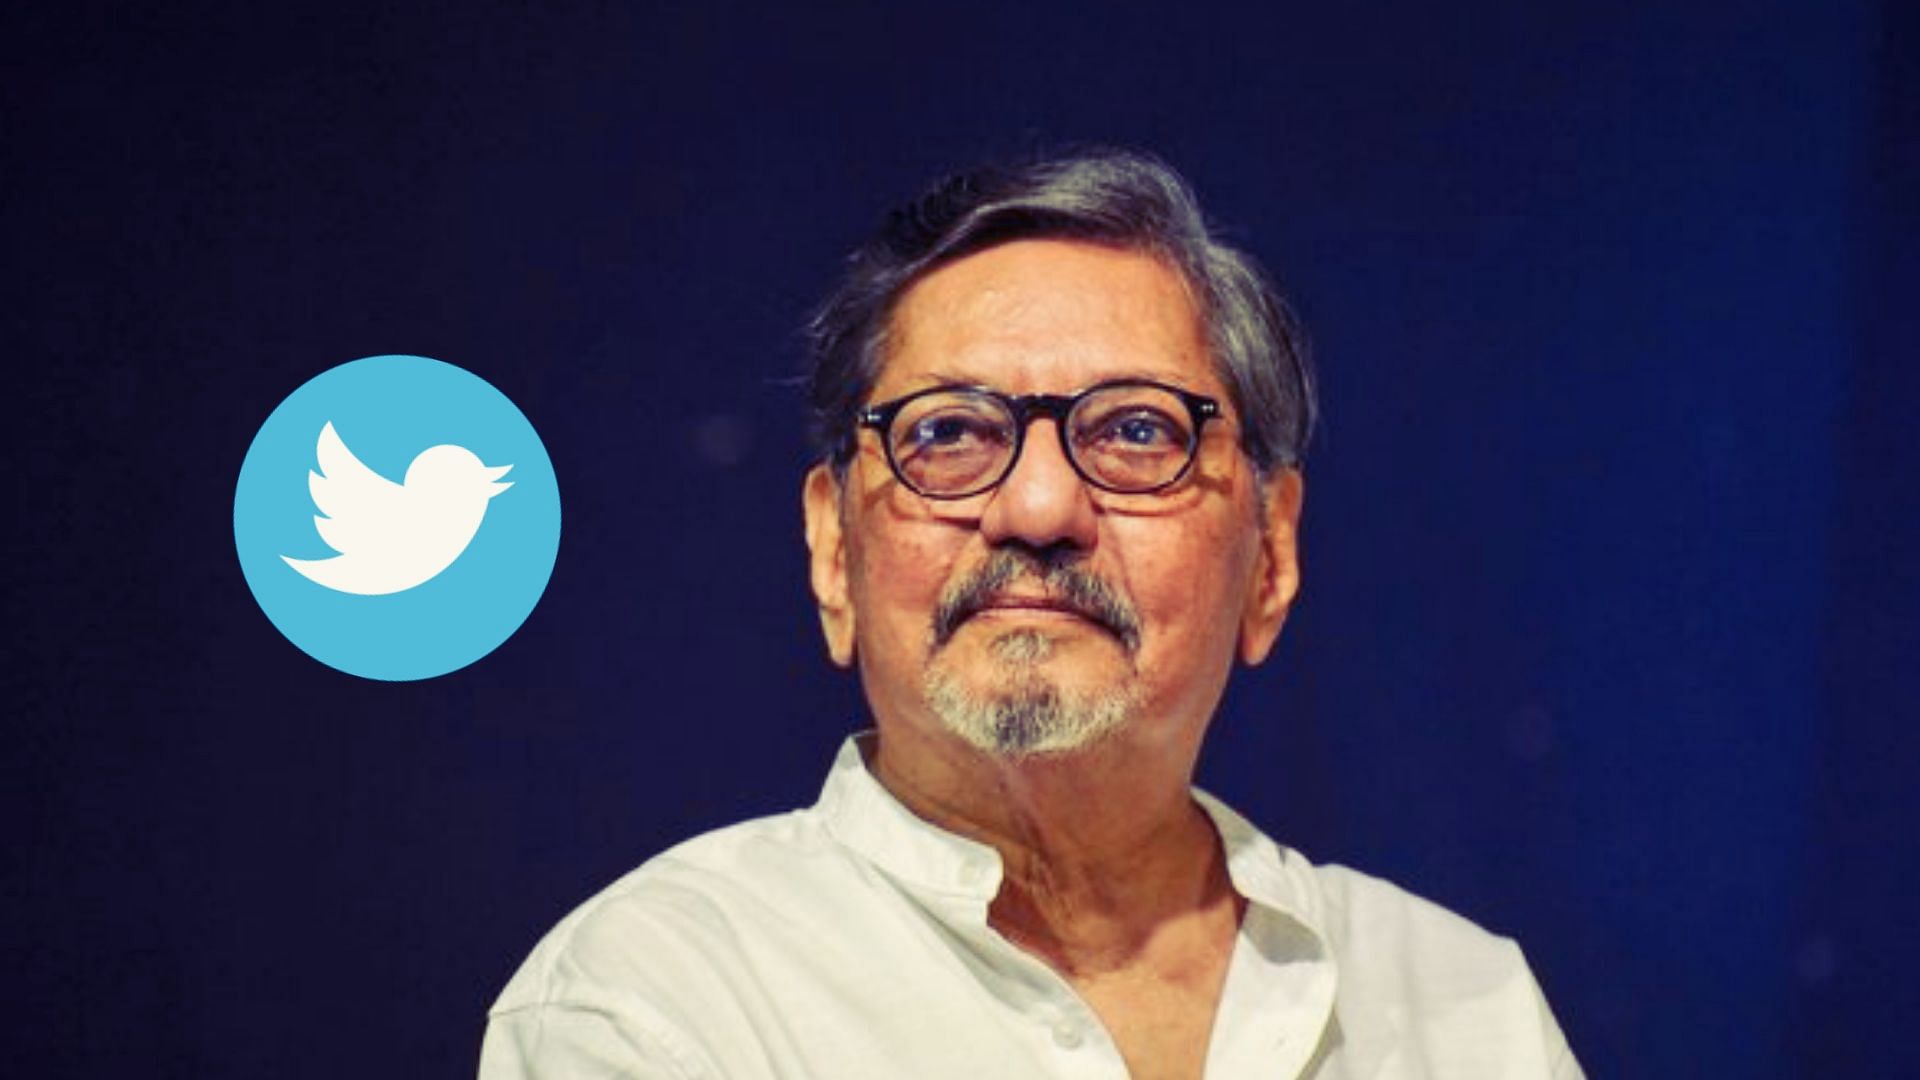 Keeping Palekar’s contribution in perspective, several spoke out against the treatment meted out to the veteran actor and expressed their shock at having to watch a video where he was treated with disrespect.